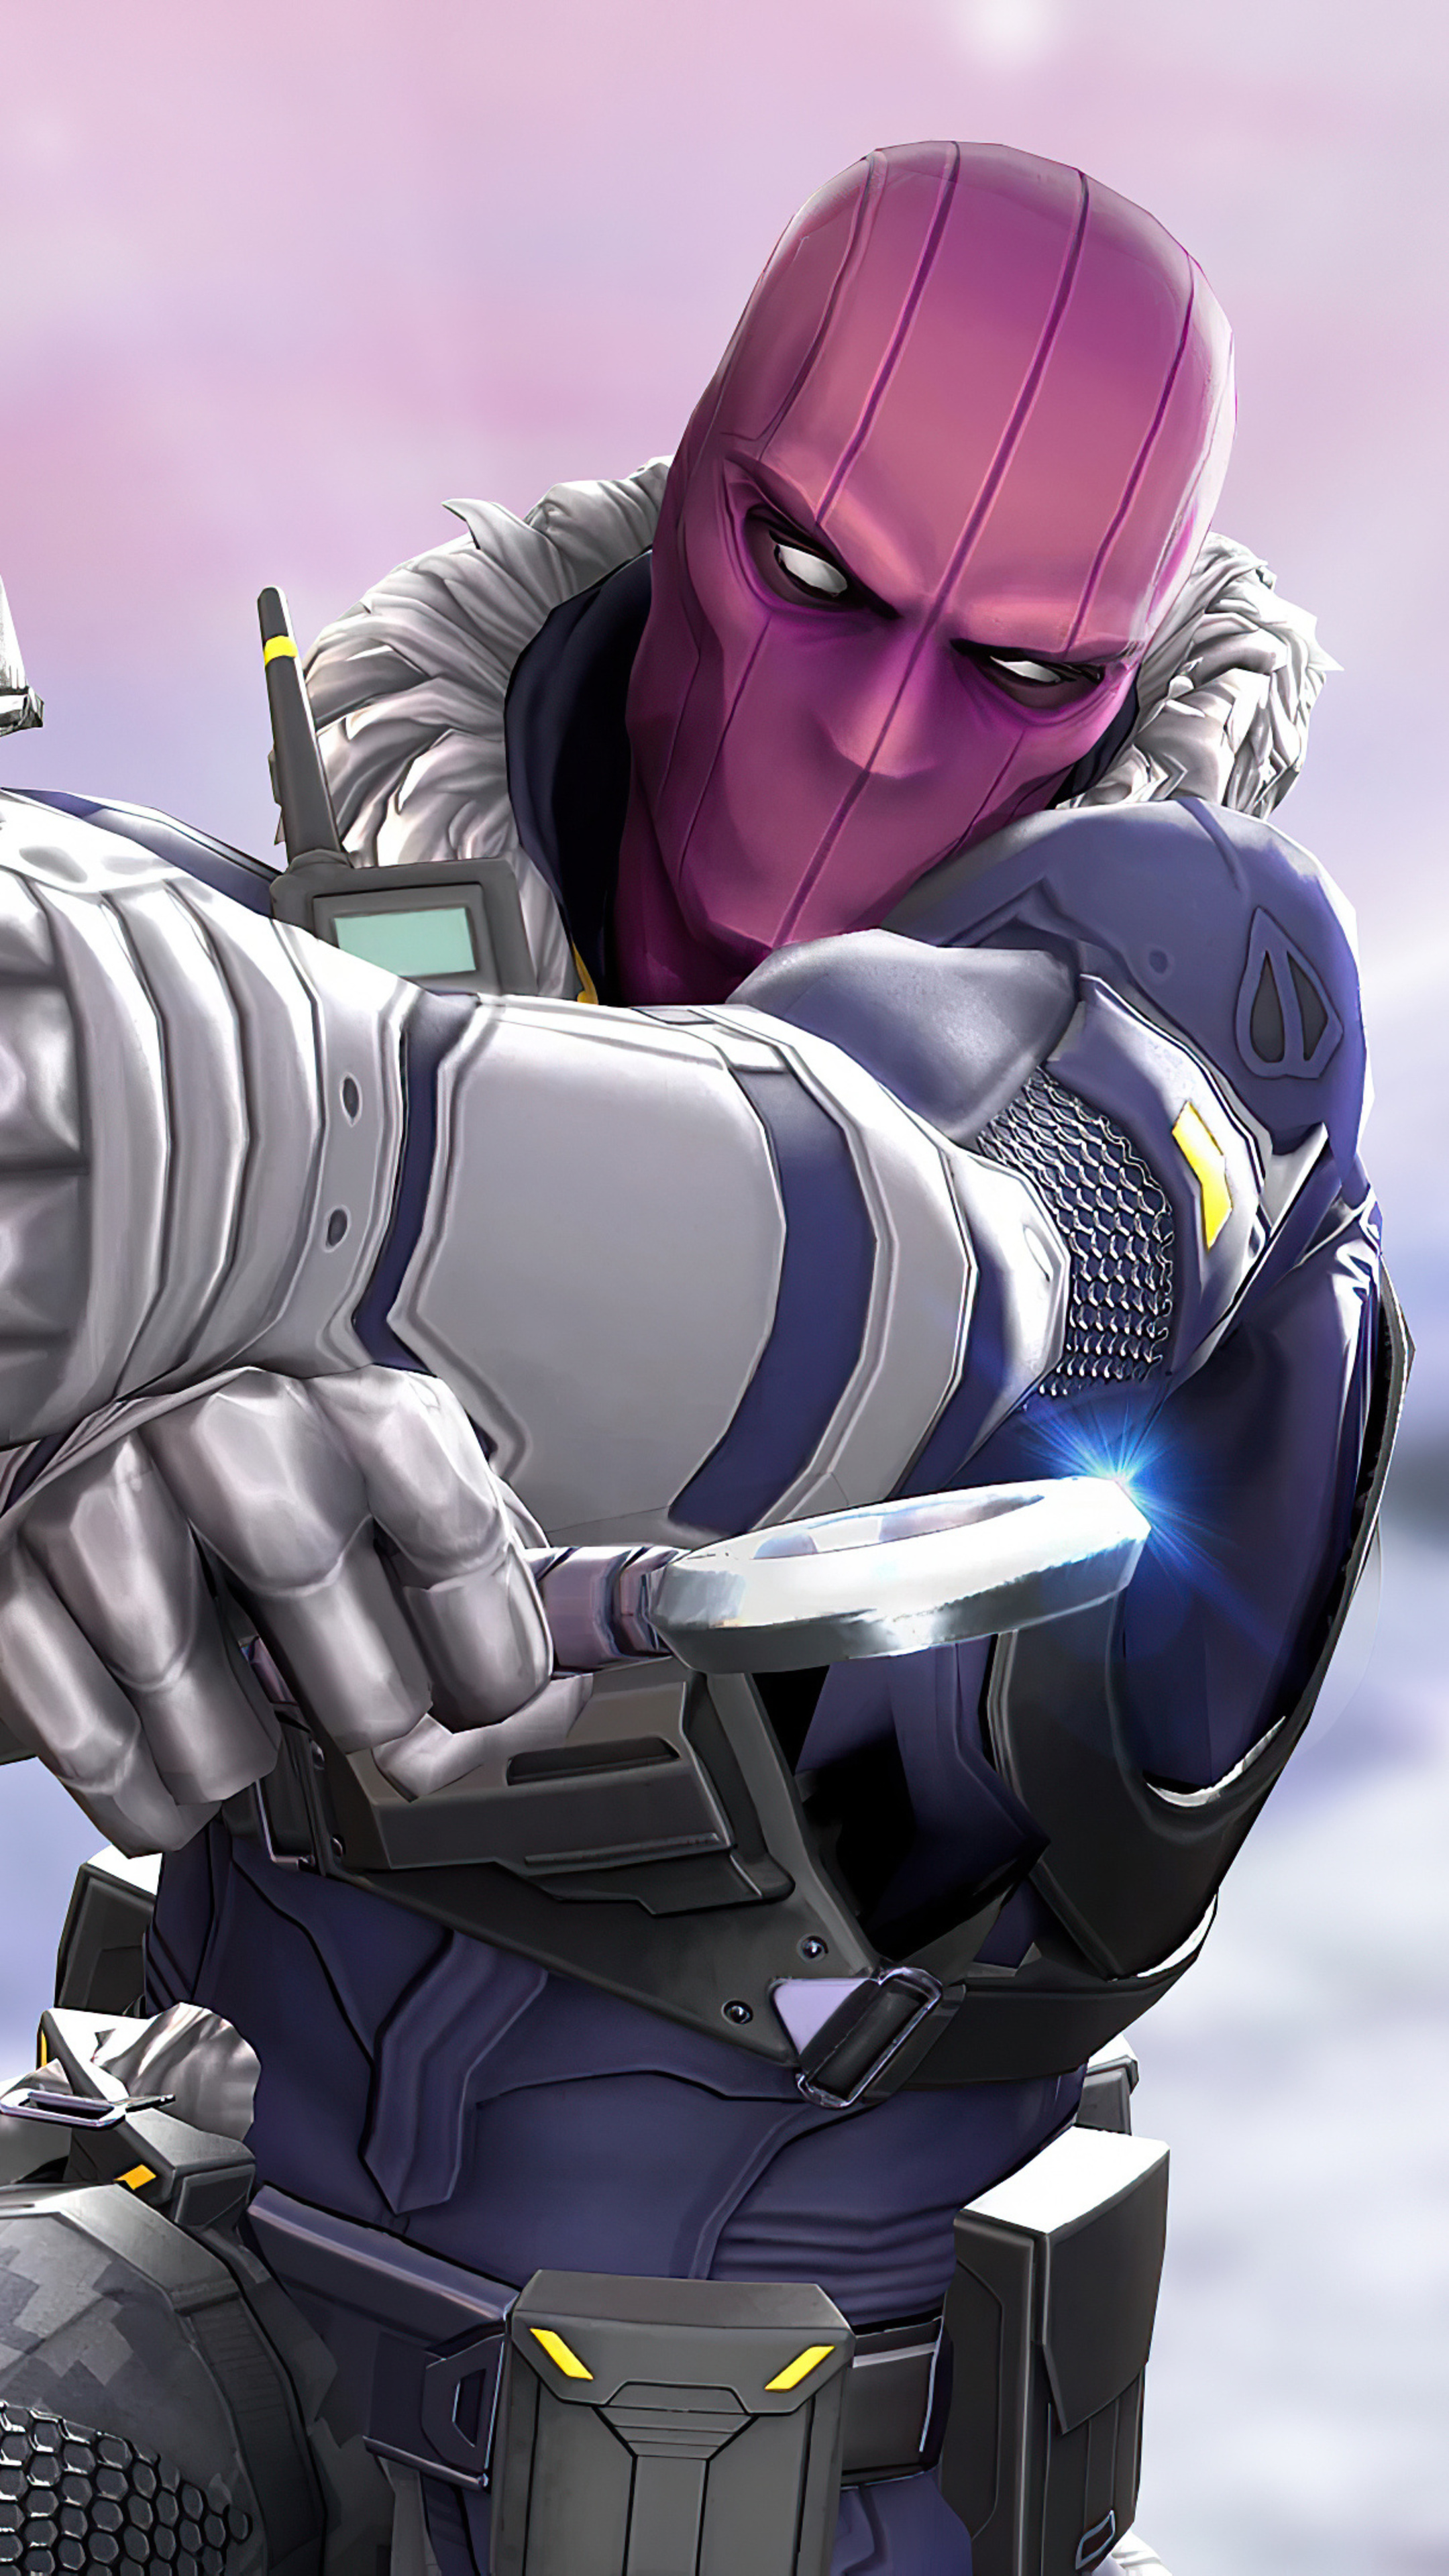 Marvel Strike Force Baron Zemo Sony Xperia X, XZ, Z5 Premium HD 4k Wallpaper, Image, Background, Photo and Picture